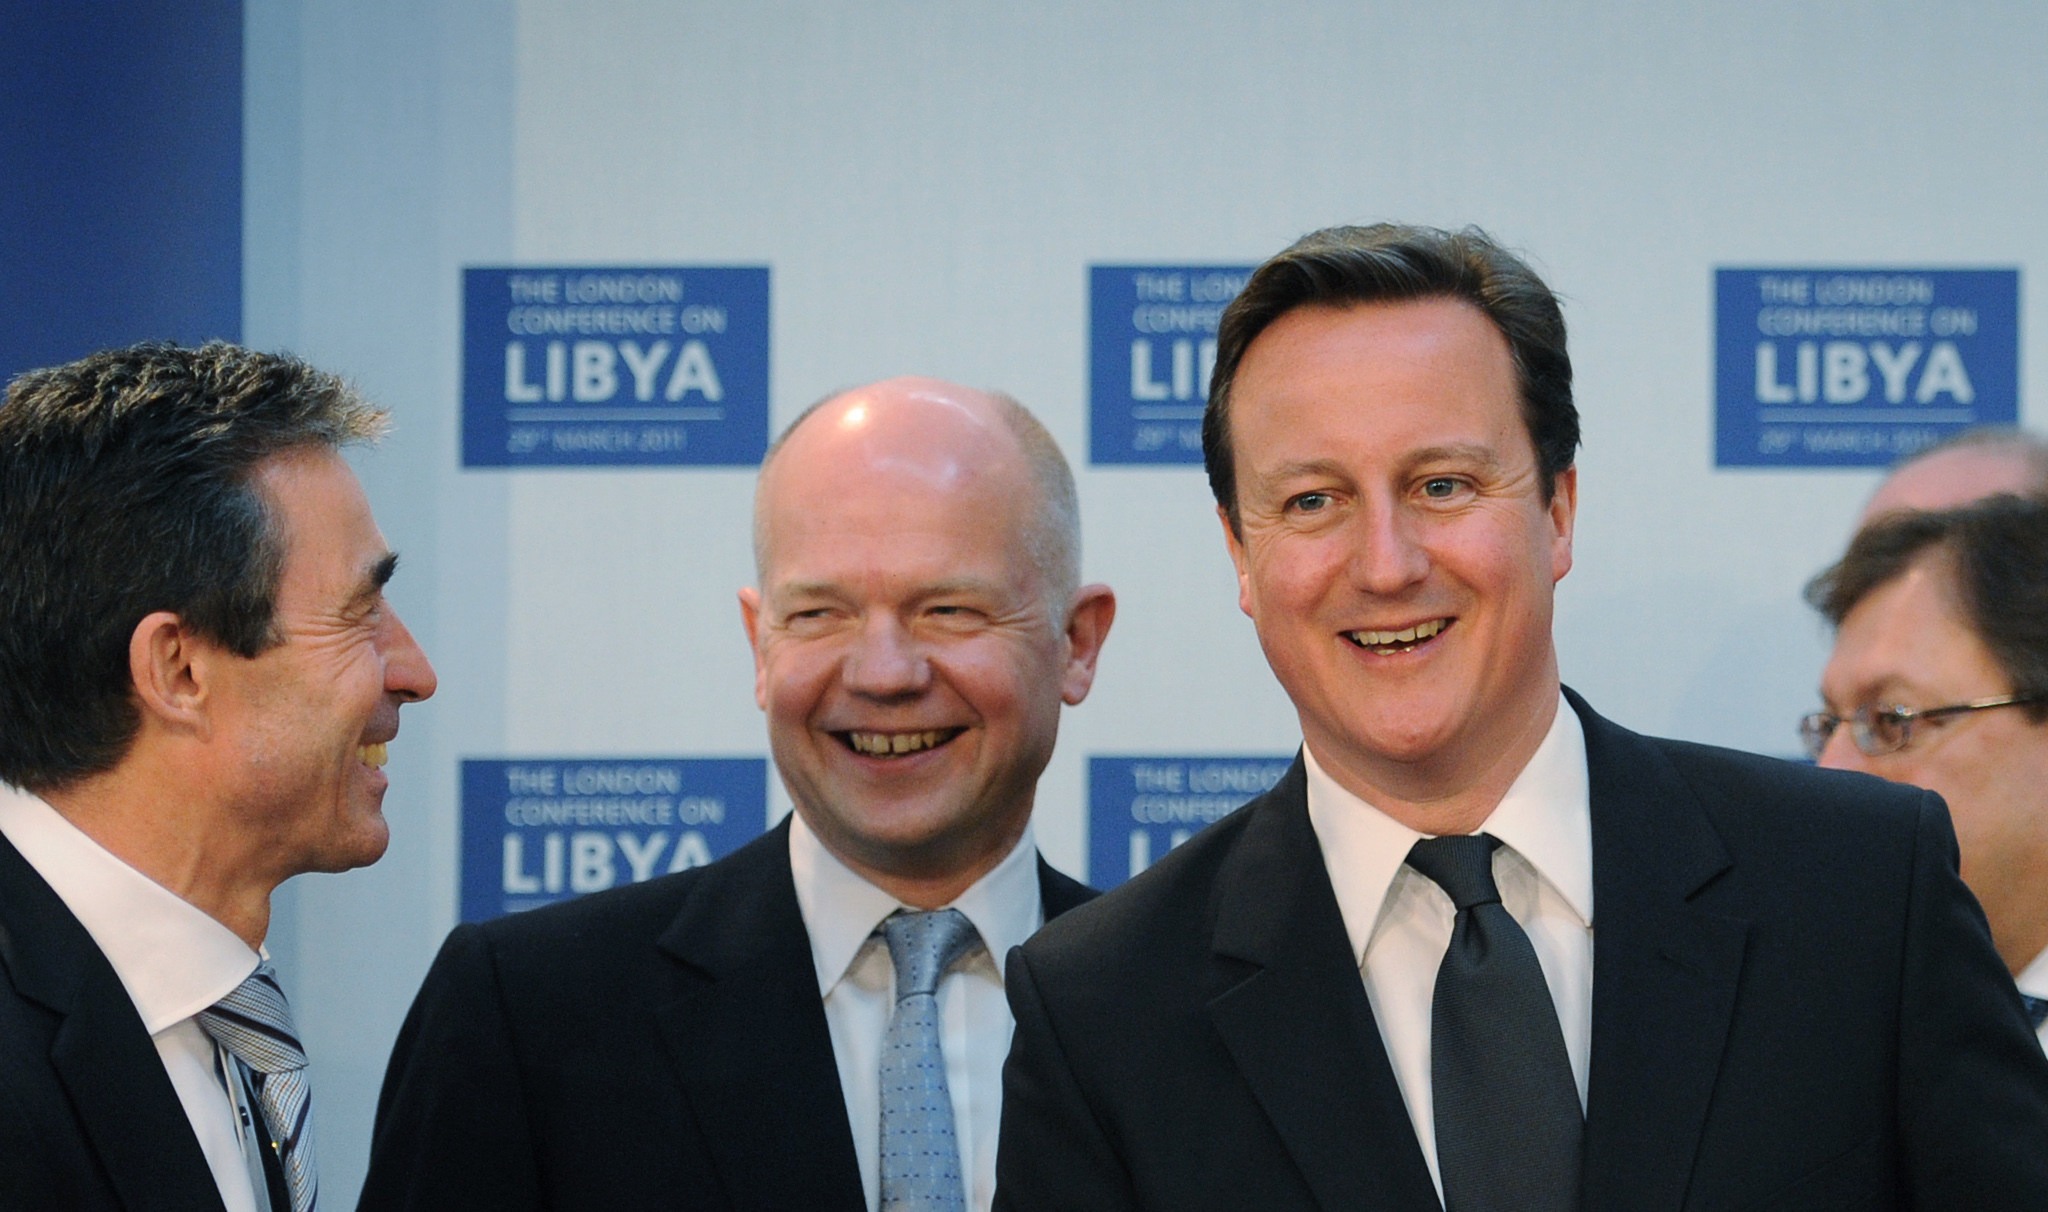 NATO Secretary General Anders Fogh Rasmussen with British British foreign secretary William Hague and PM David Cameron at the Libya Conference in London, 2011. (Photo: Stefan Rousseau /WPA Pool/ Getty)